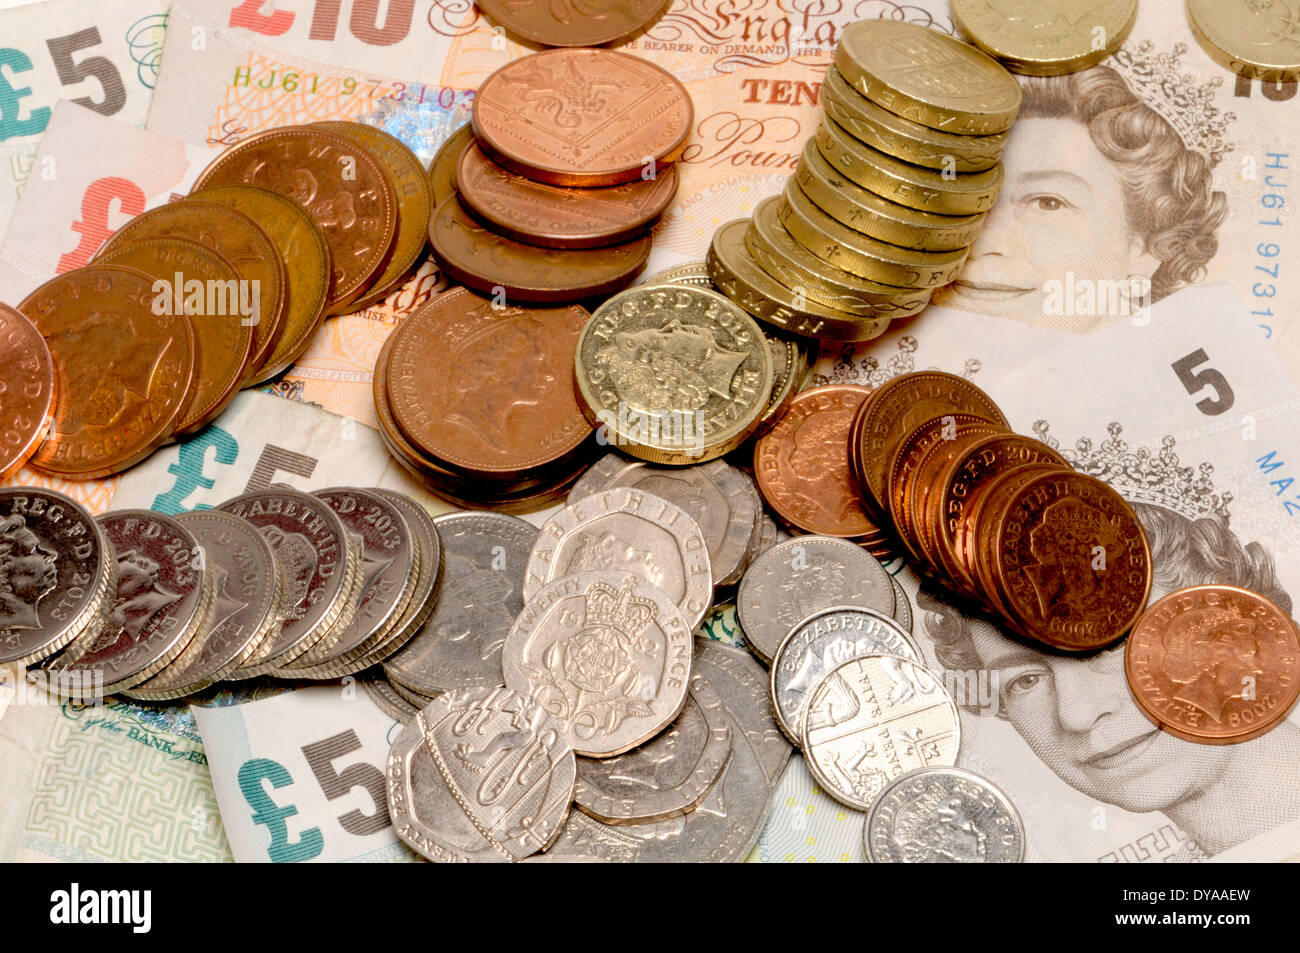 British currency, coins and notes Stock Photo